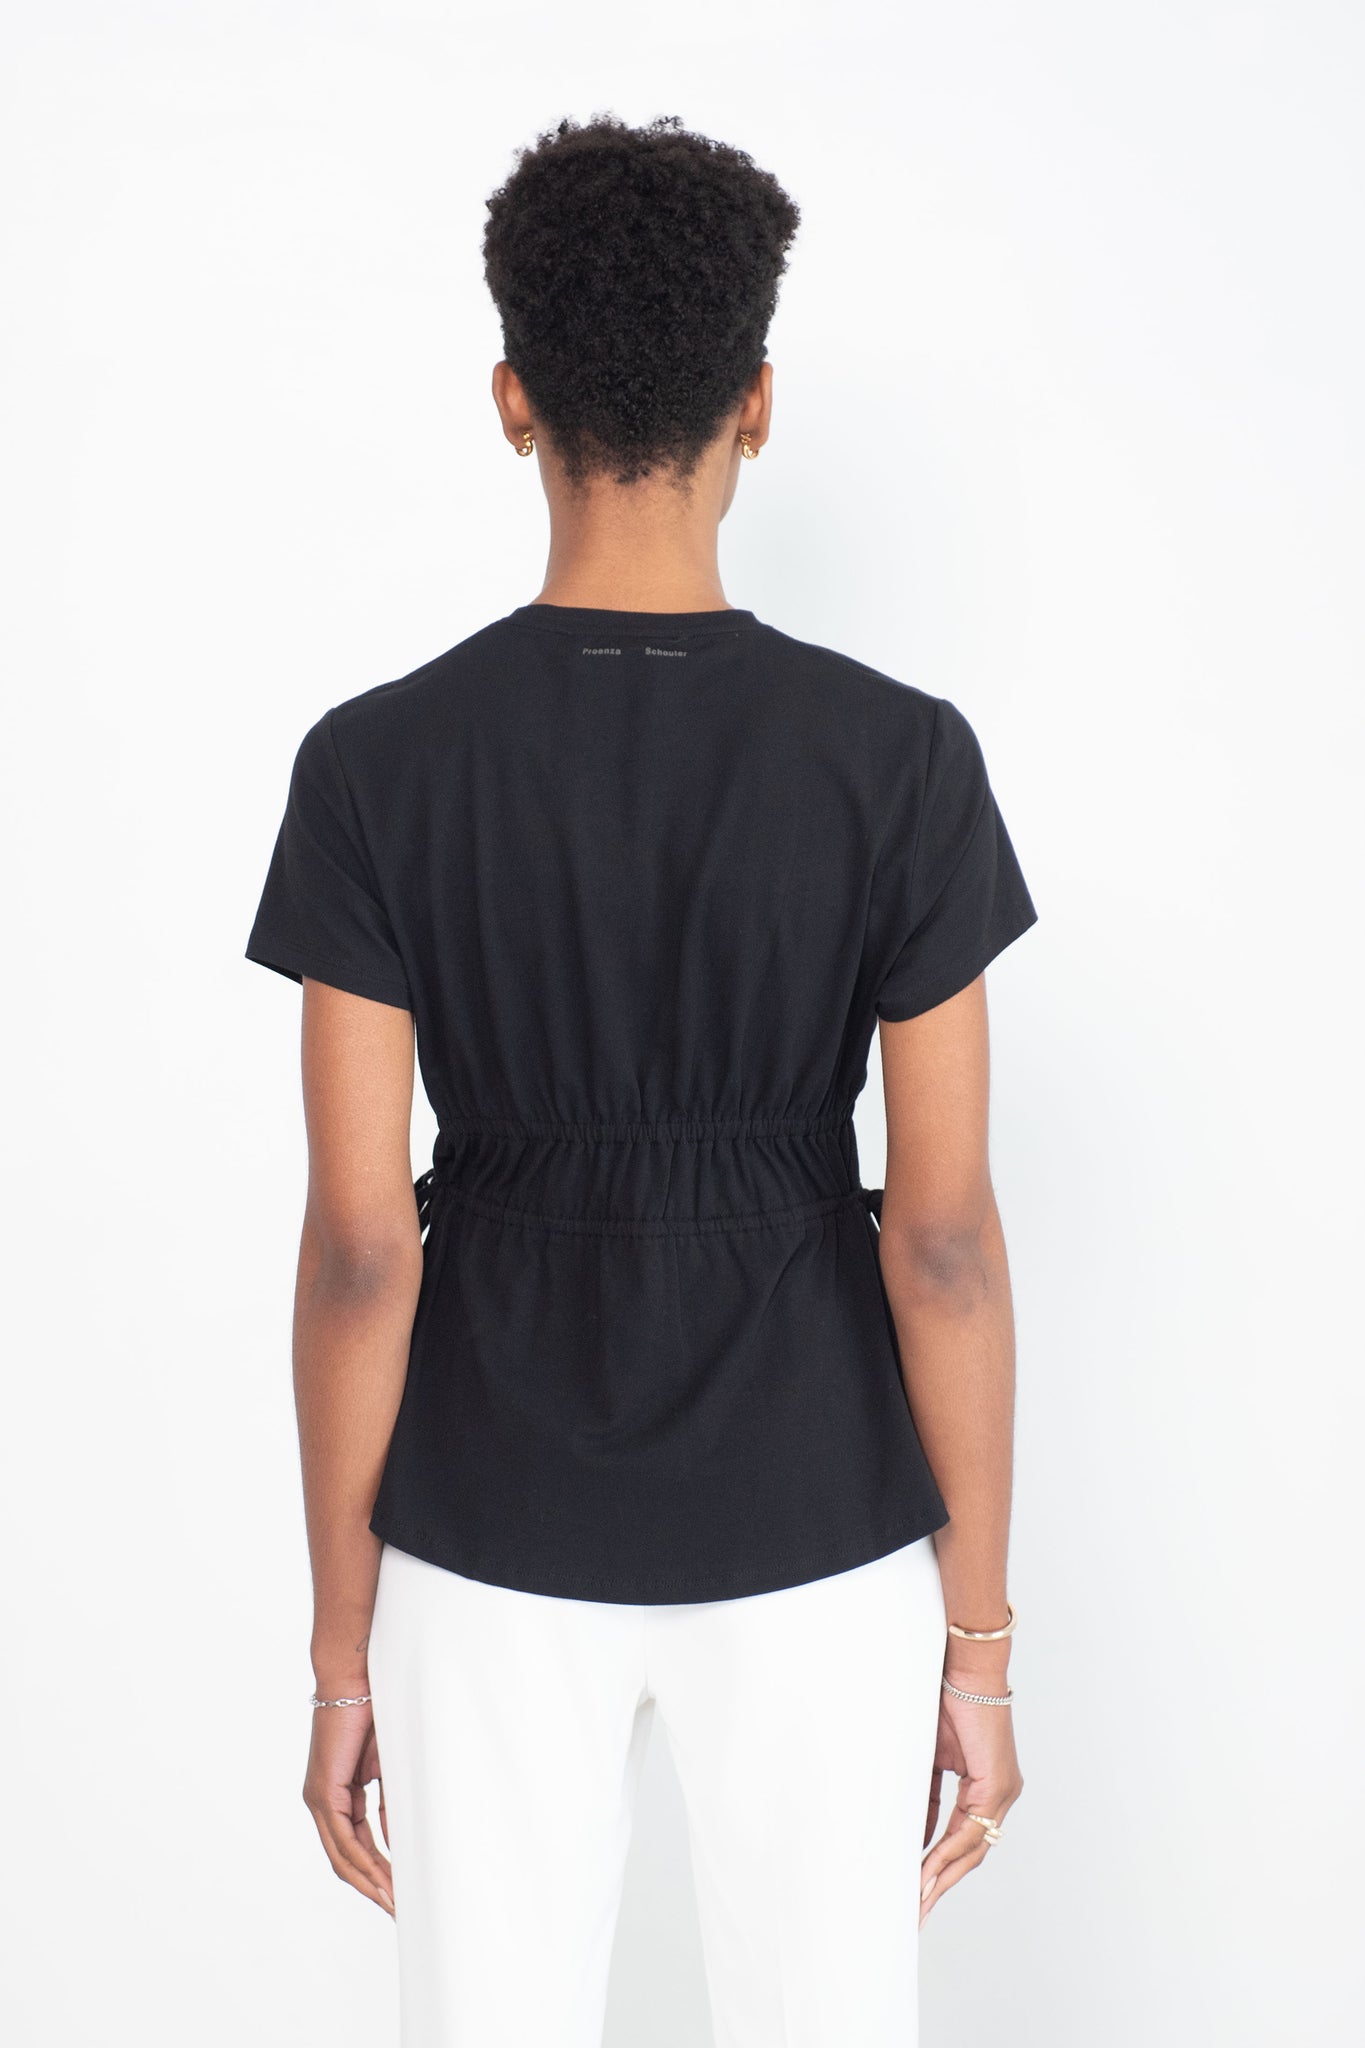 Proenza Schouler White Label - Ruched Side Tie T-Shirt, Black